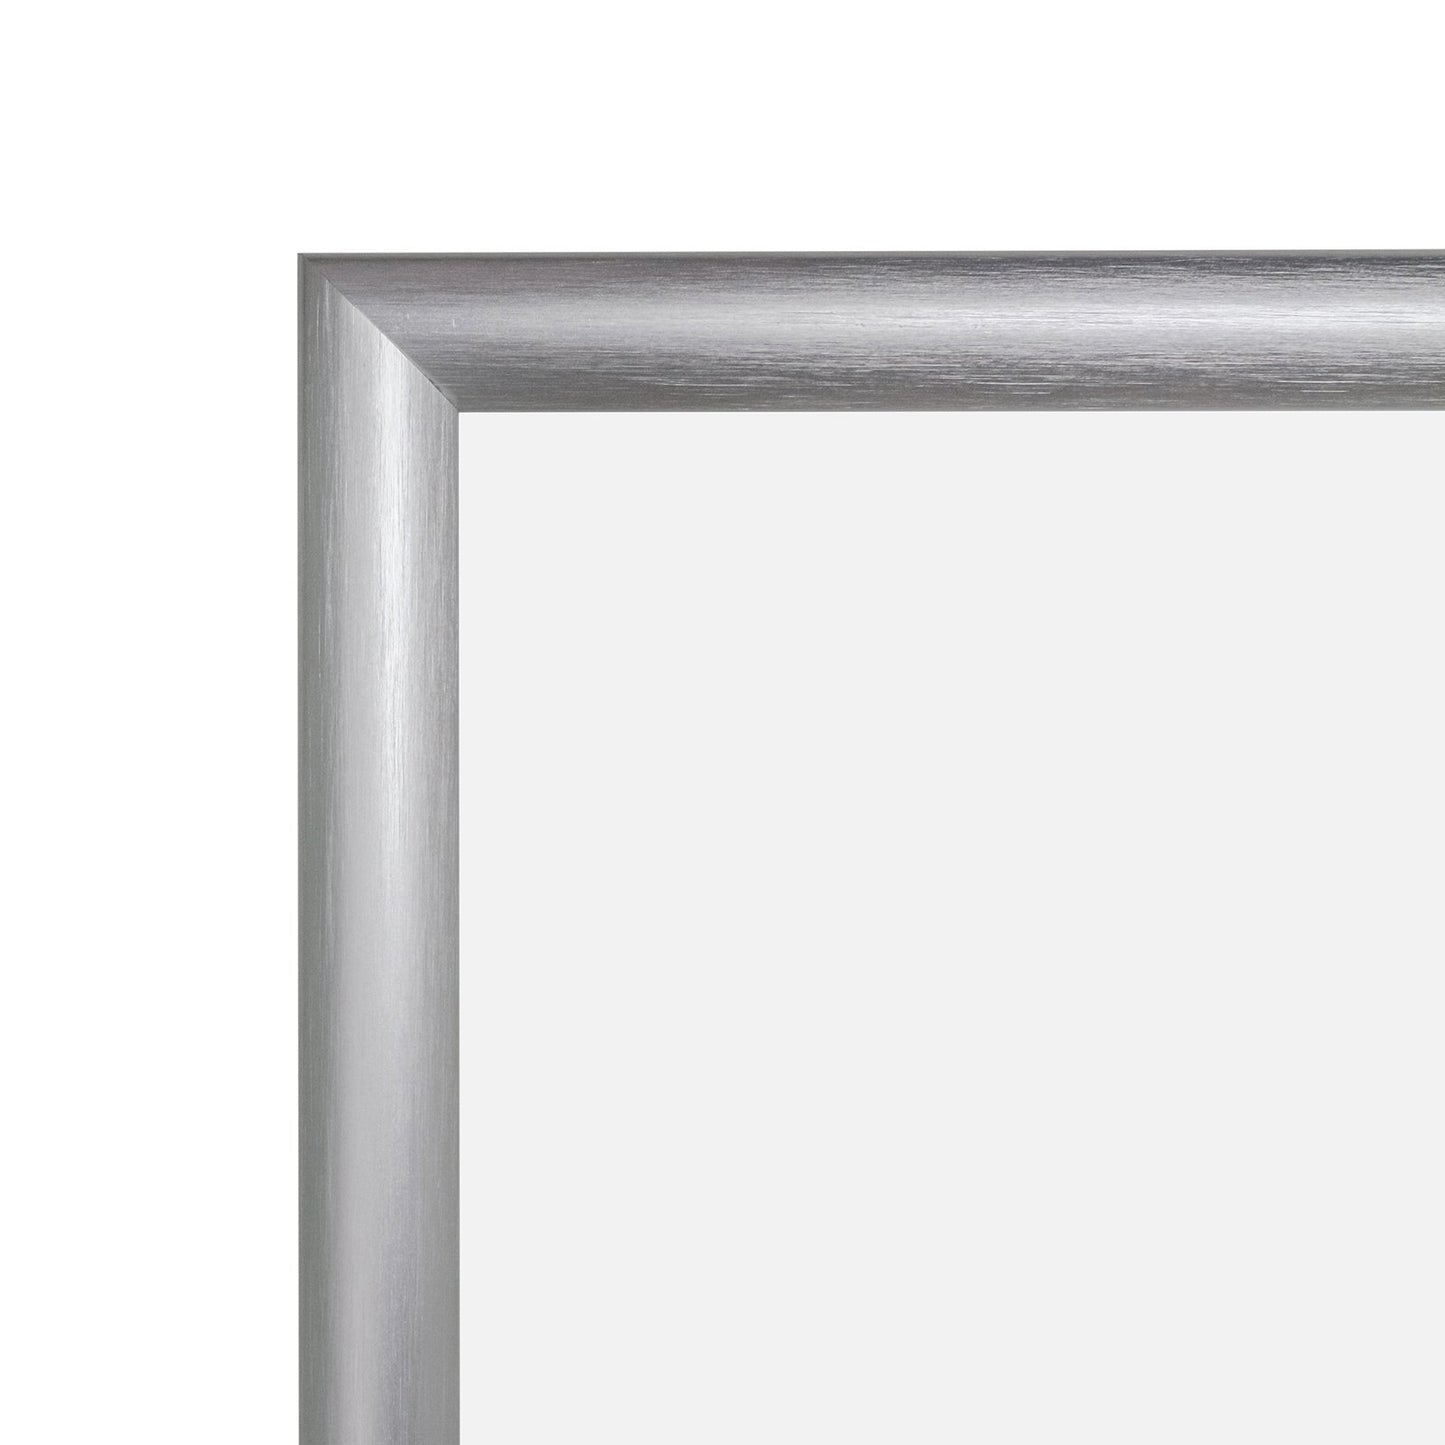 18x24 Brushed Silver SnapeZo® Snap Frame - 1 Inch Profile